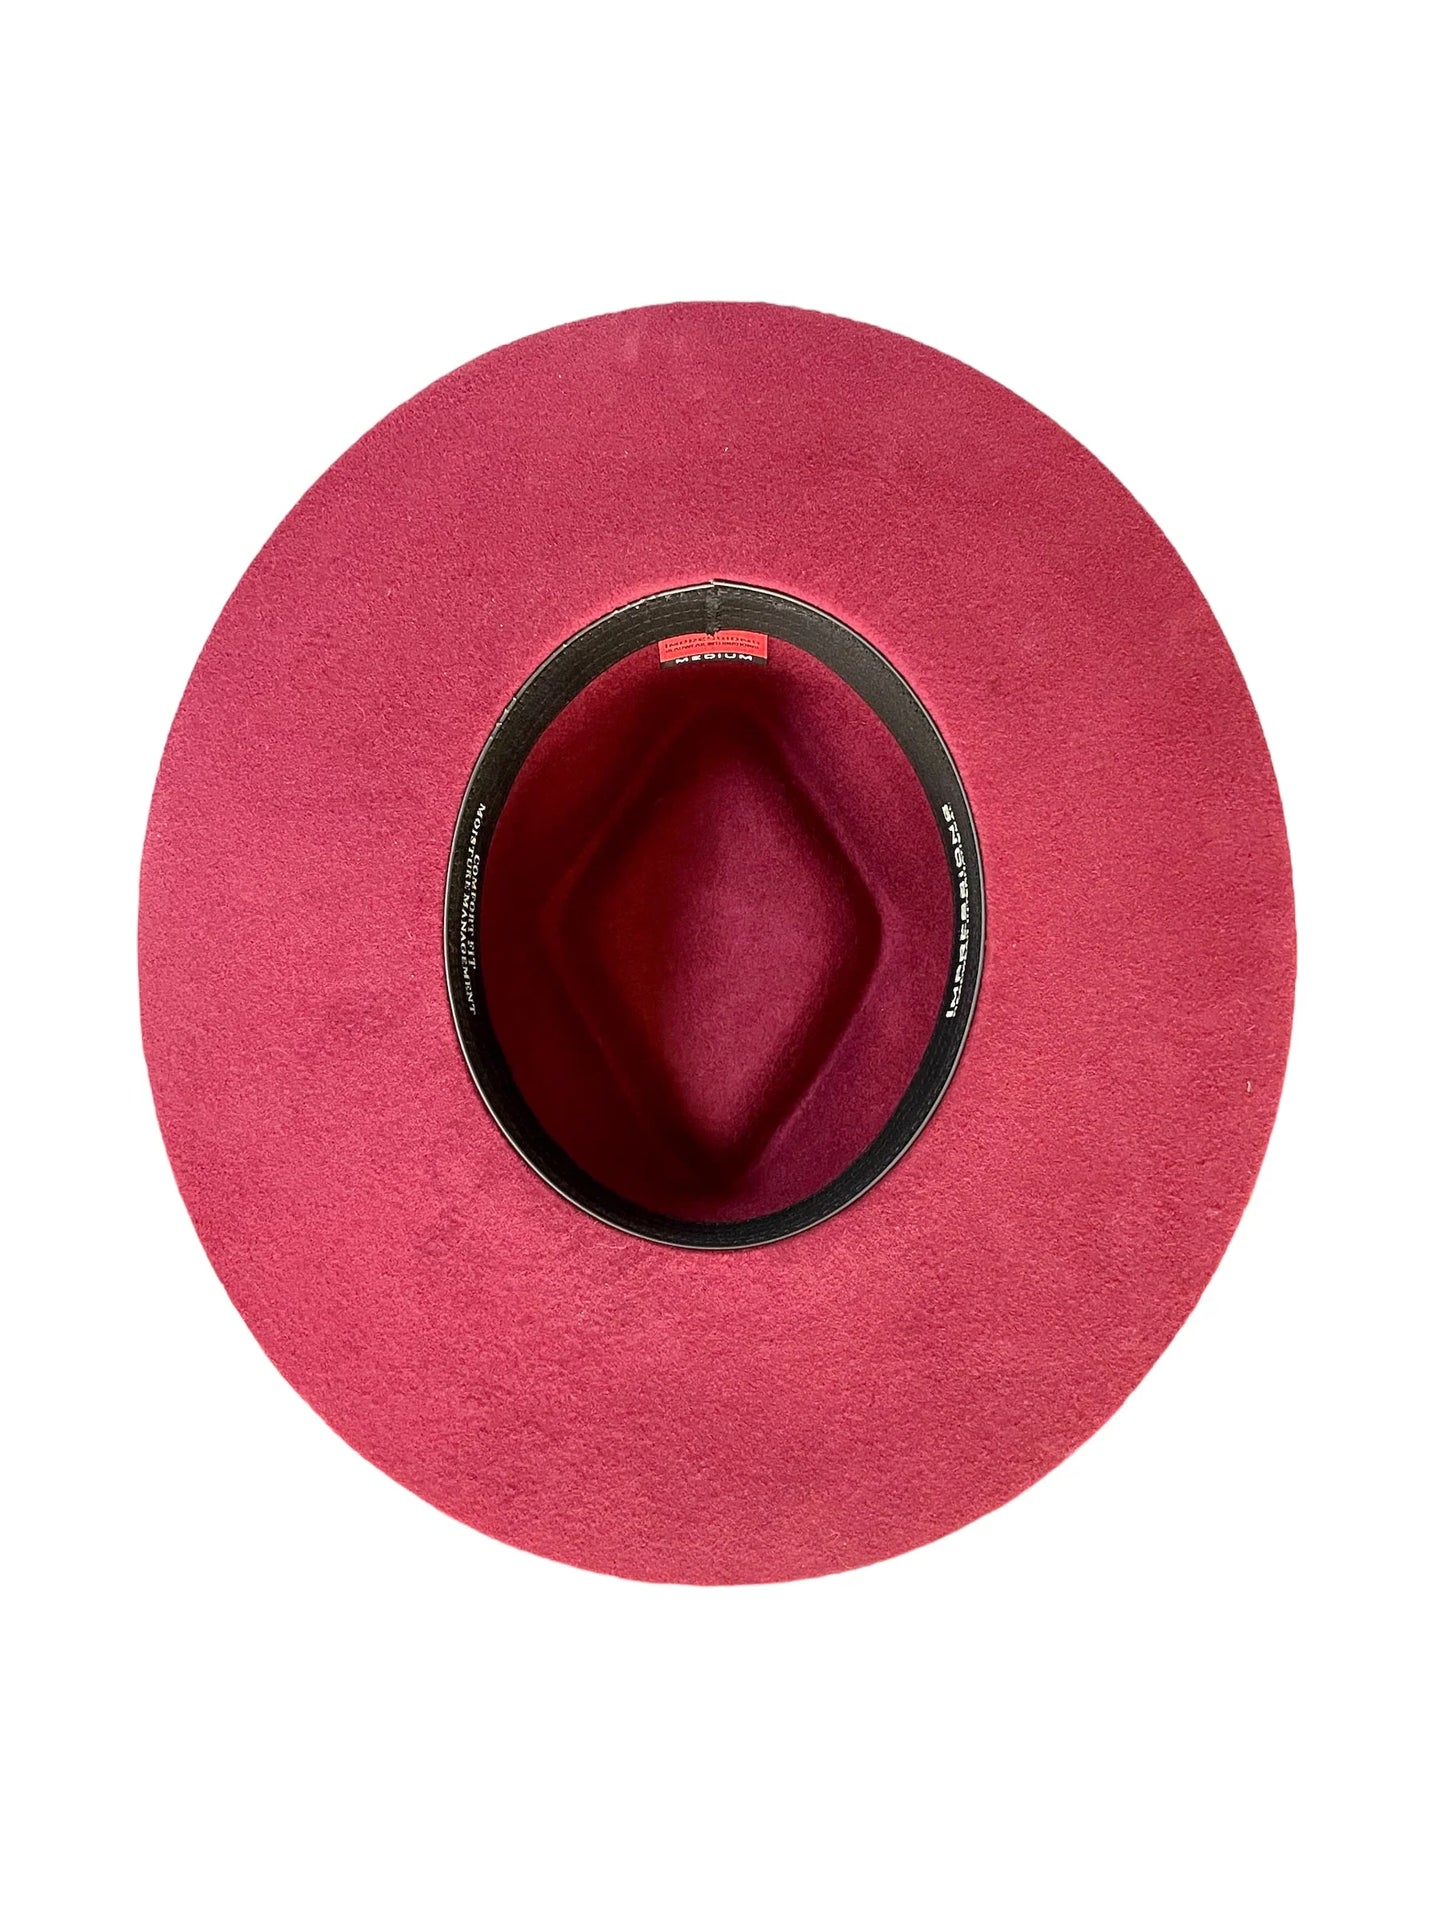 Drifter Maroon Cowboy Hat by Gone Country - Bourbon Cowgirl